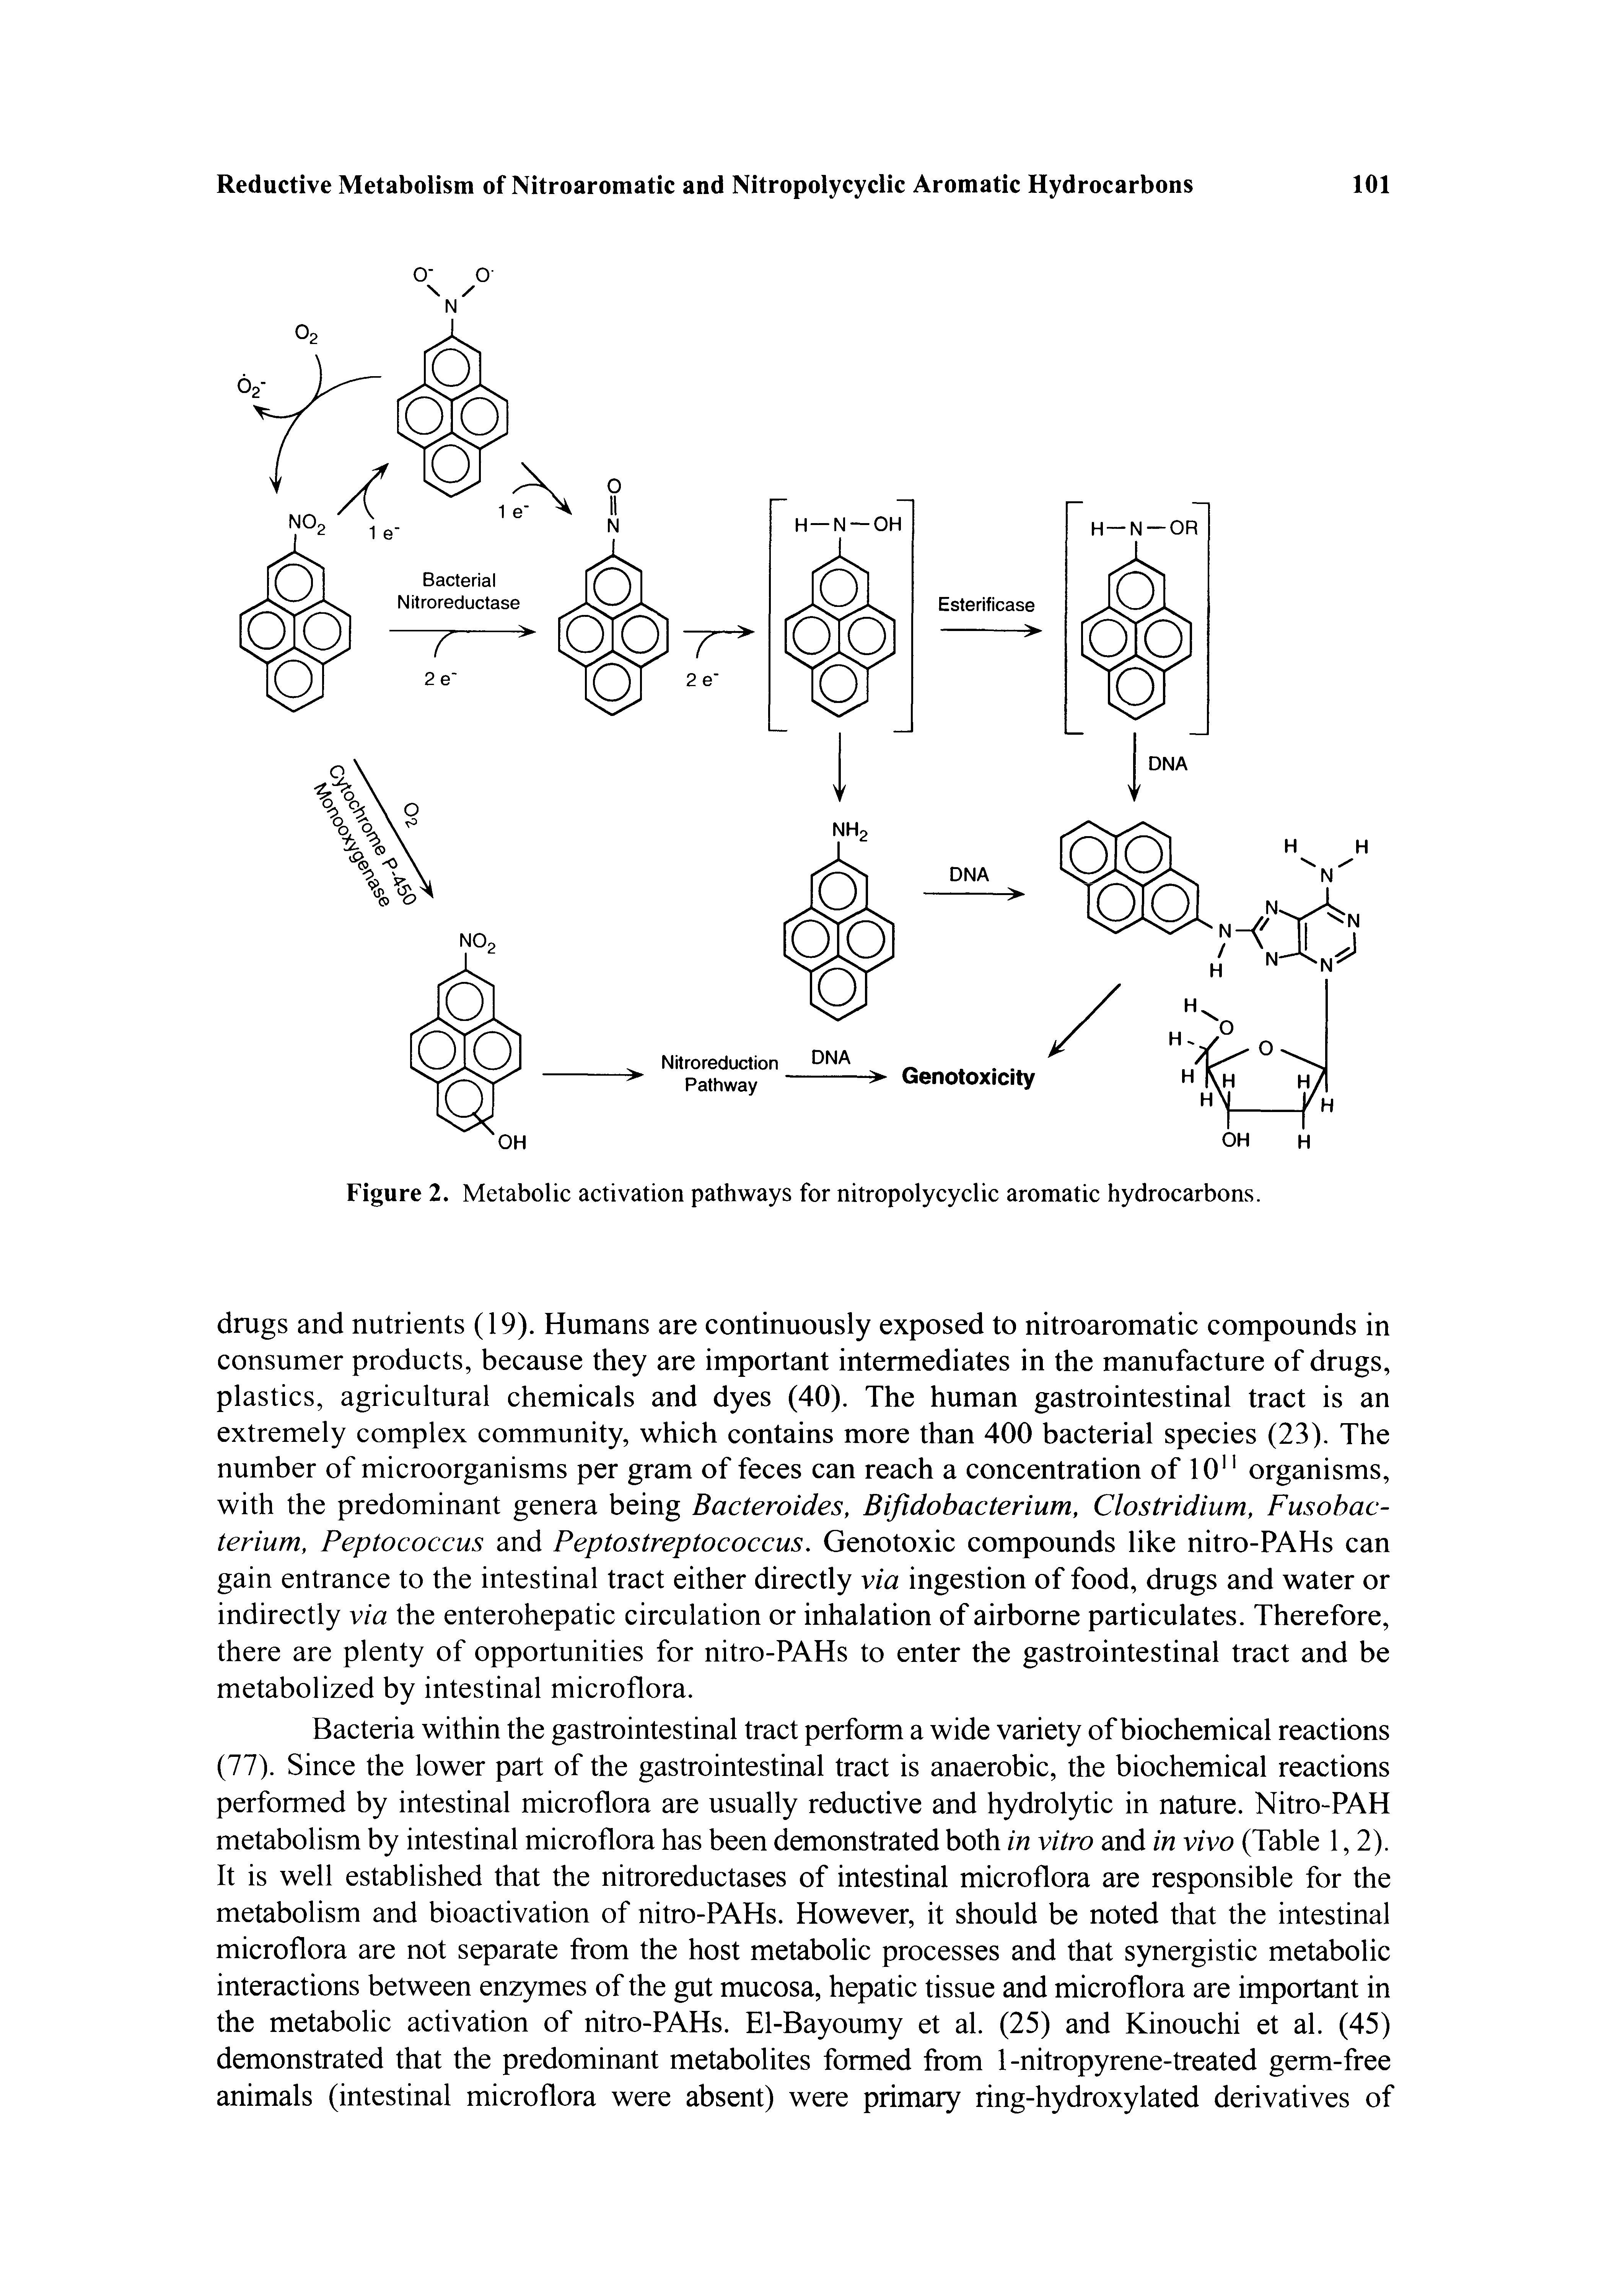 Figure 2. Metabolic activation pathways for nitropolycyclic aromatic hydrocarbons.